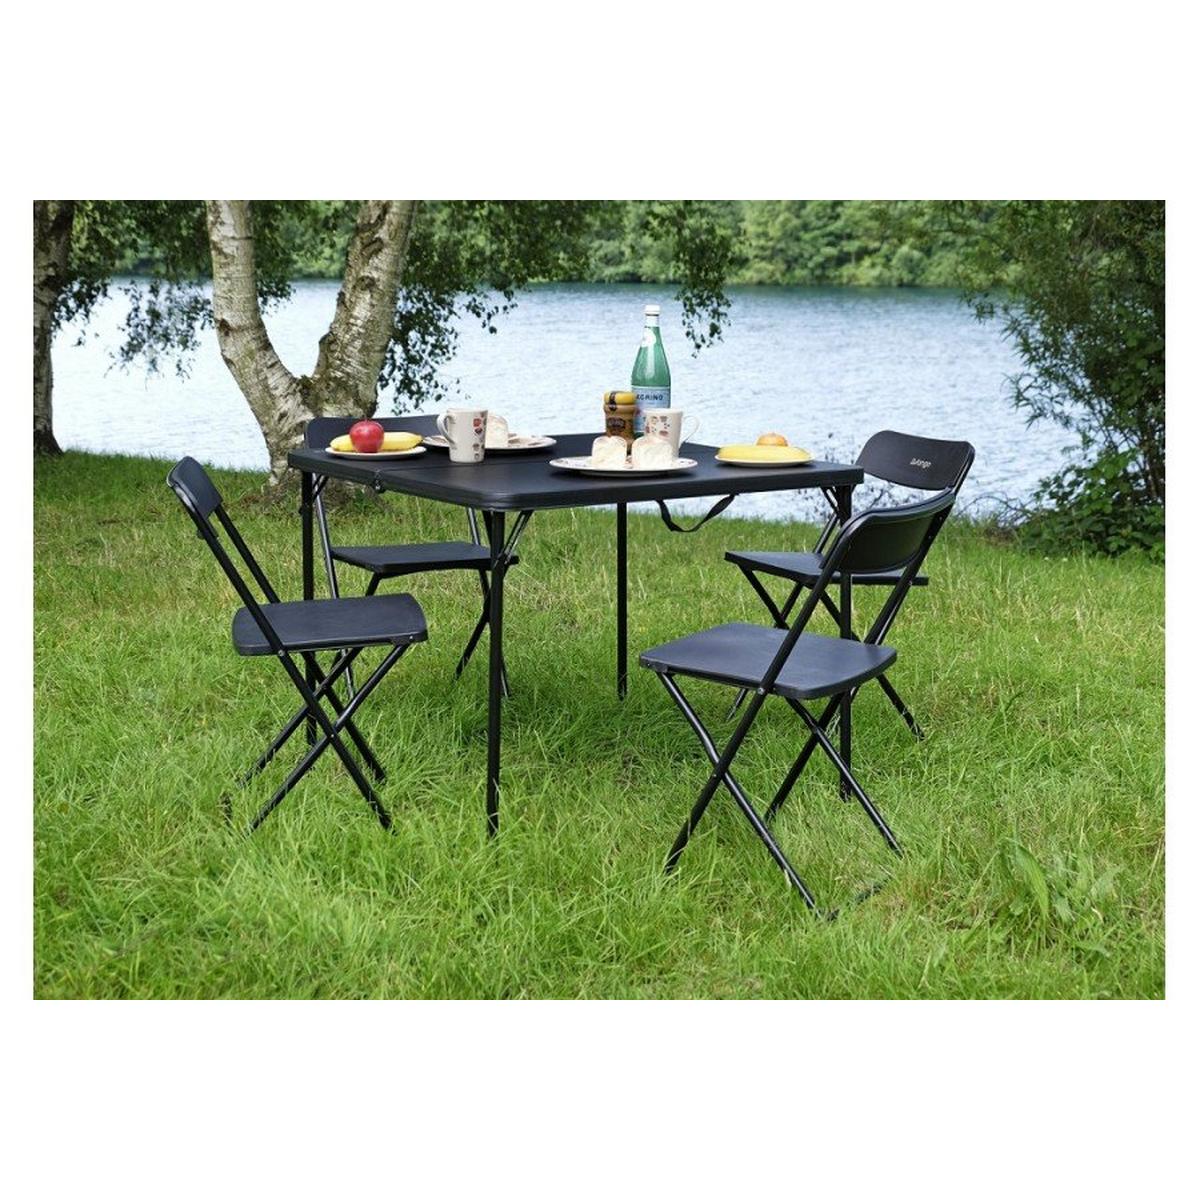 Vango Dornoch Table And Chair Set